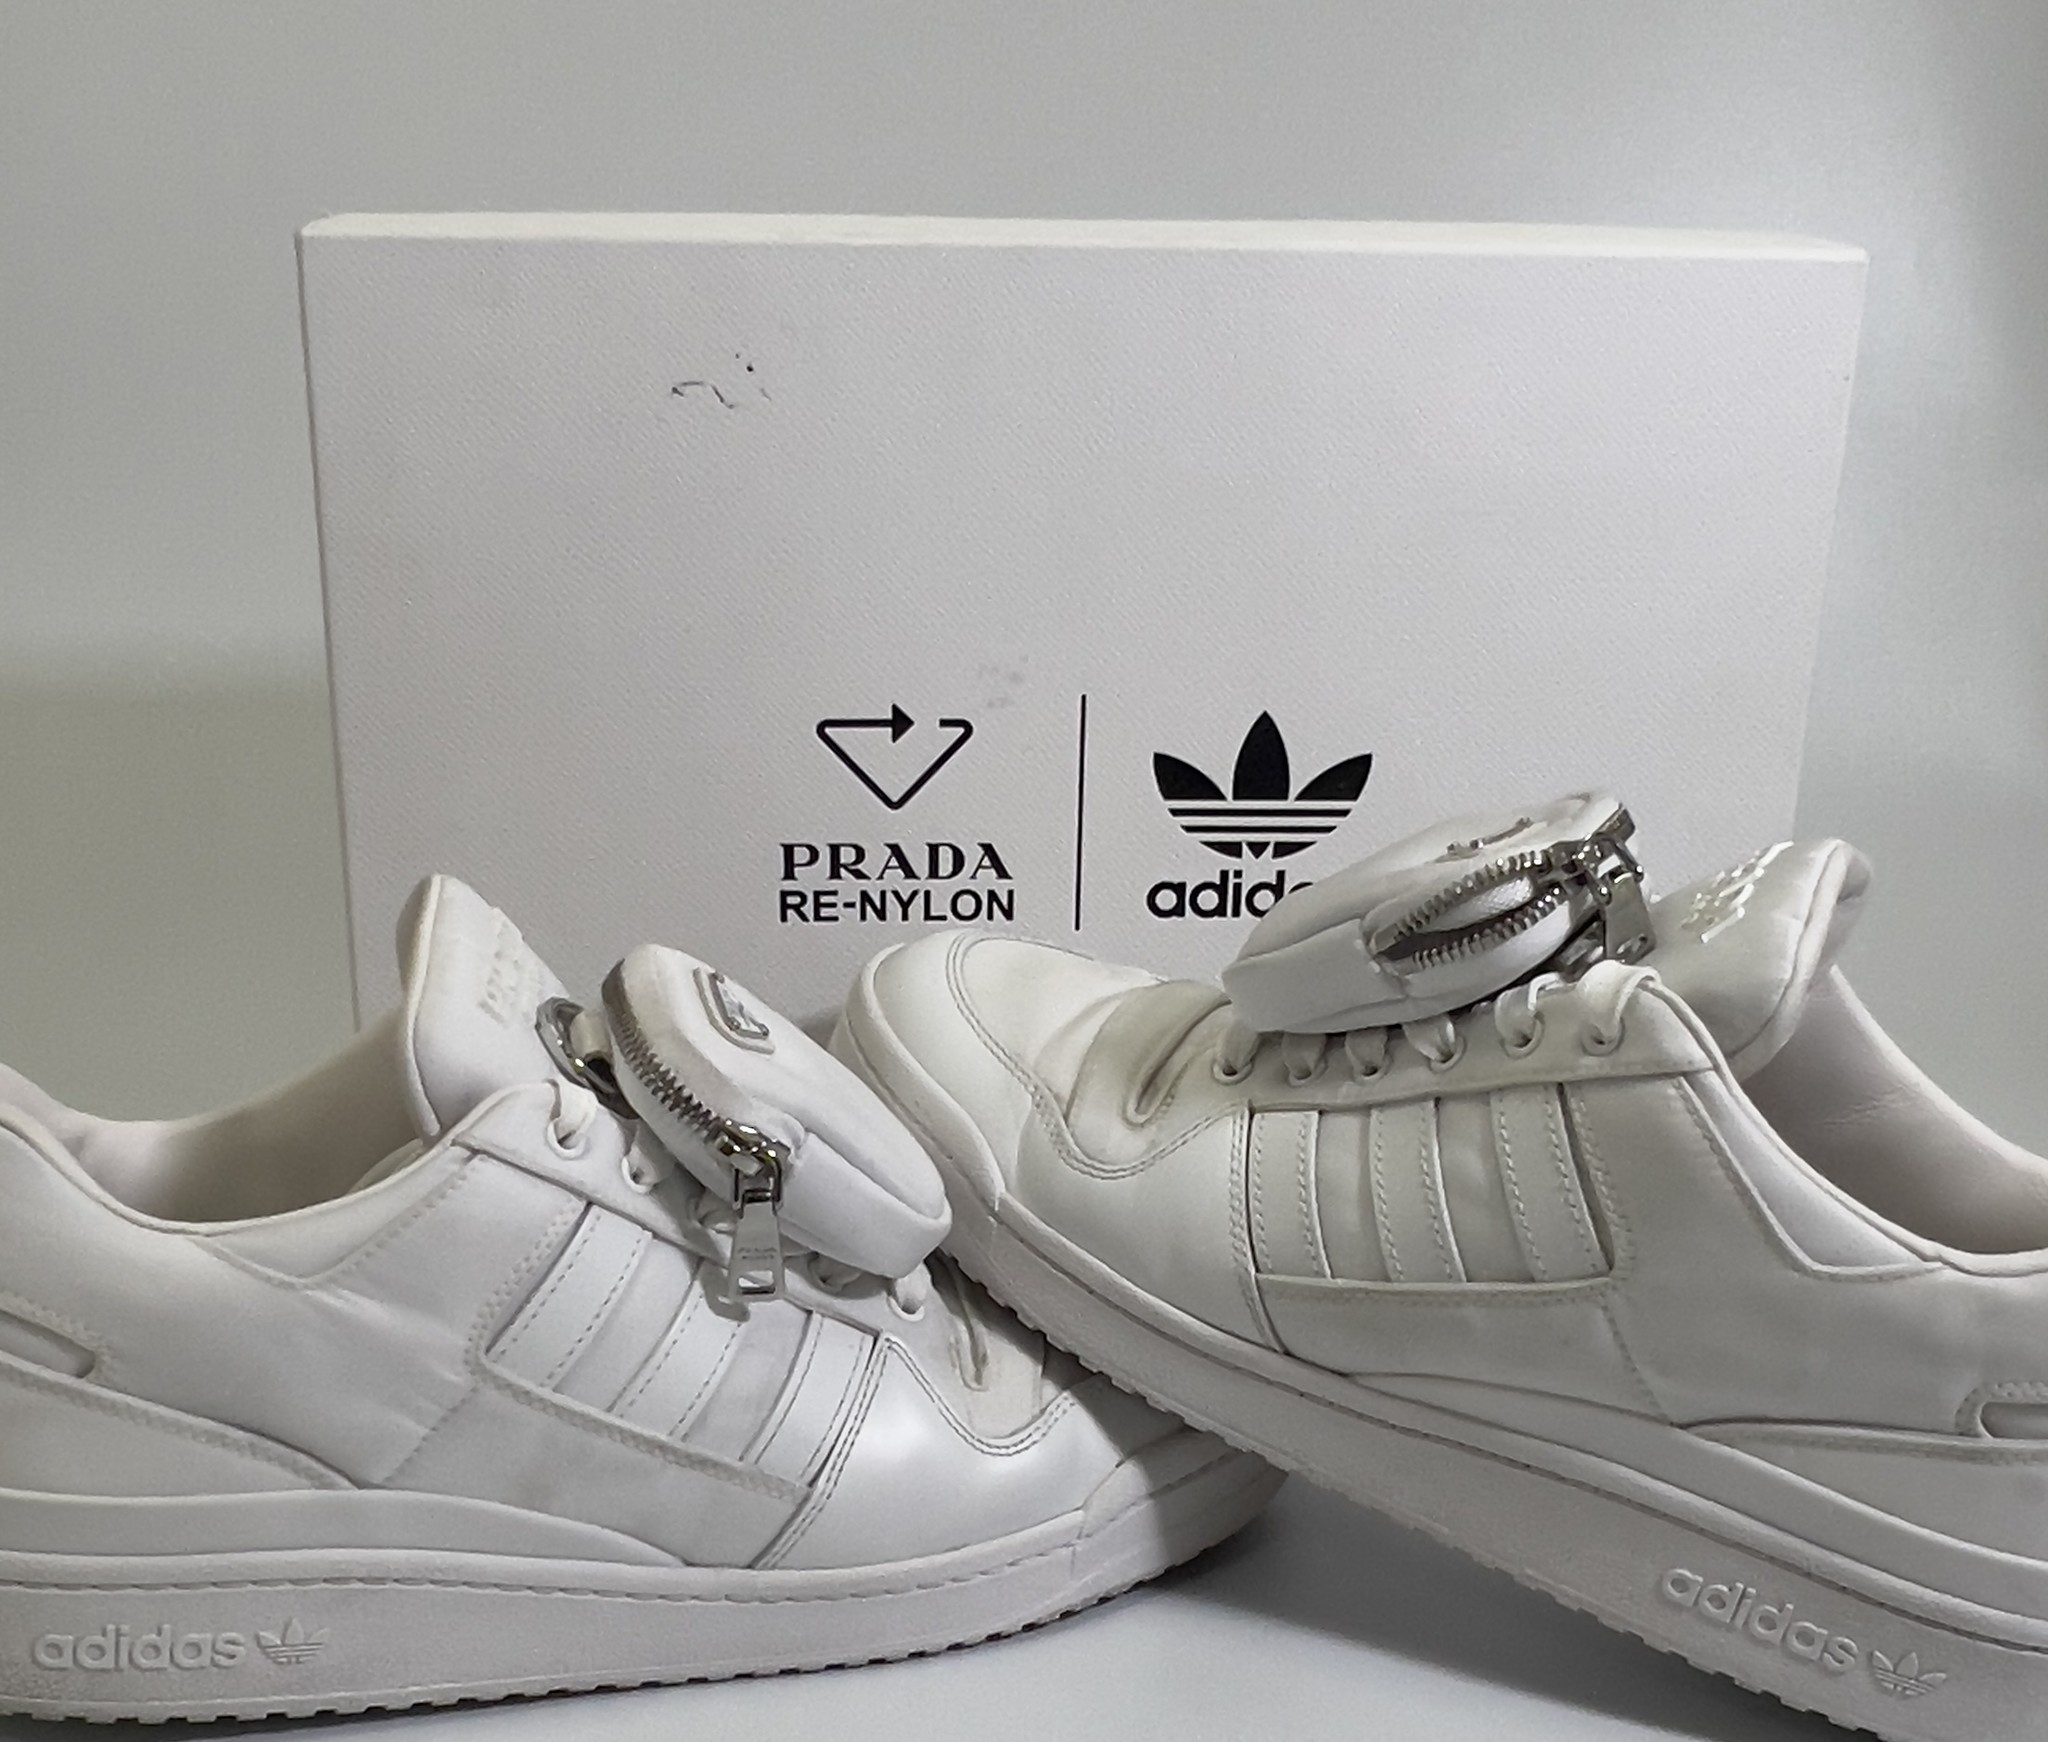 pre-owned) Adidas X Prada Forum Sneakers Size 11.5 - Bring It Back